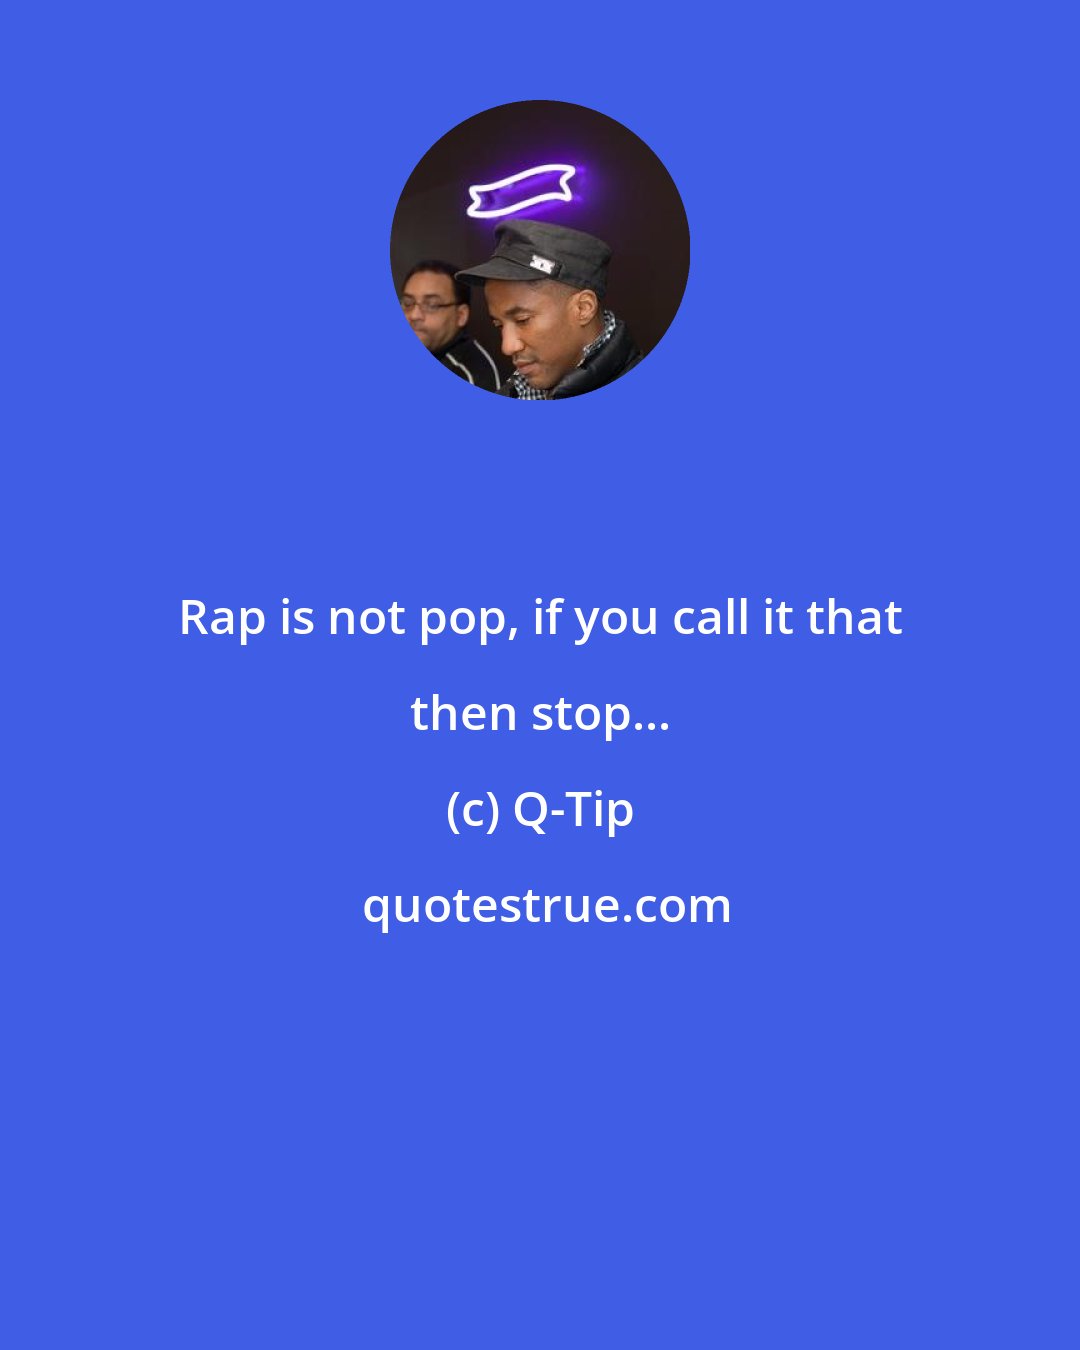 Q-Tip: Rap is not pop, if you call it that then stop...